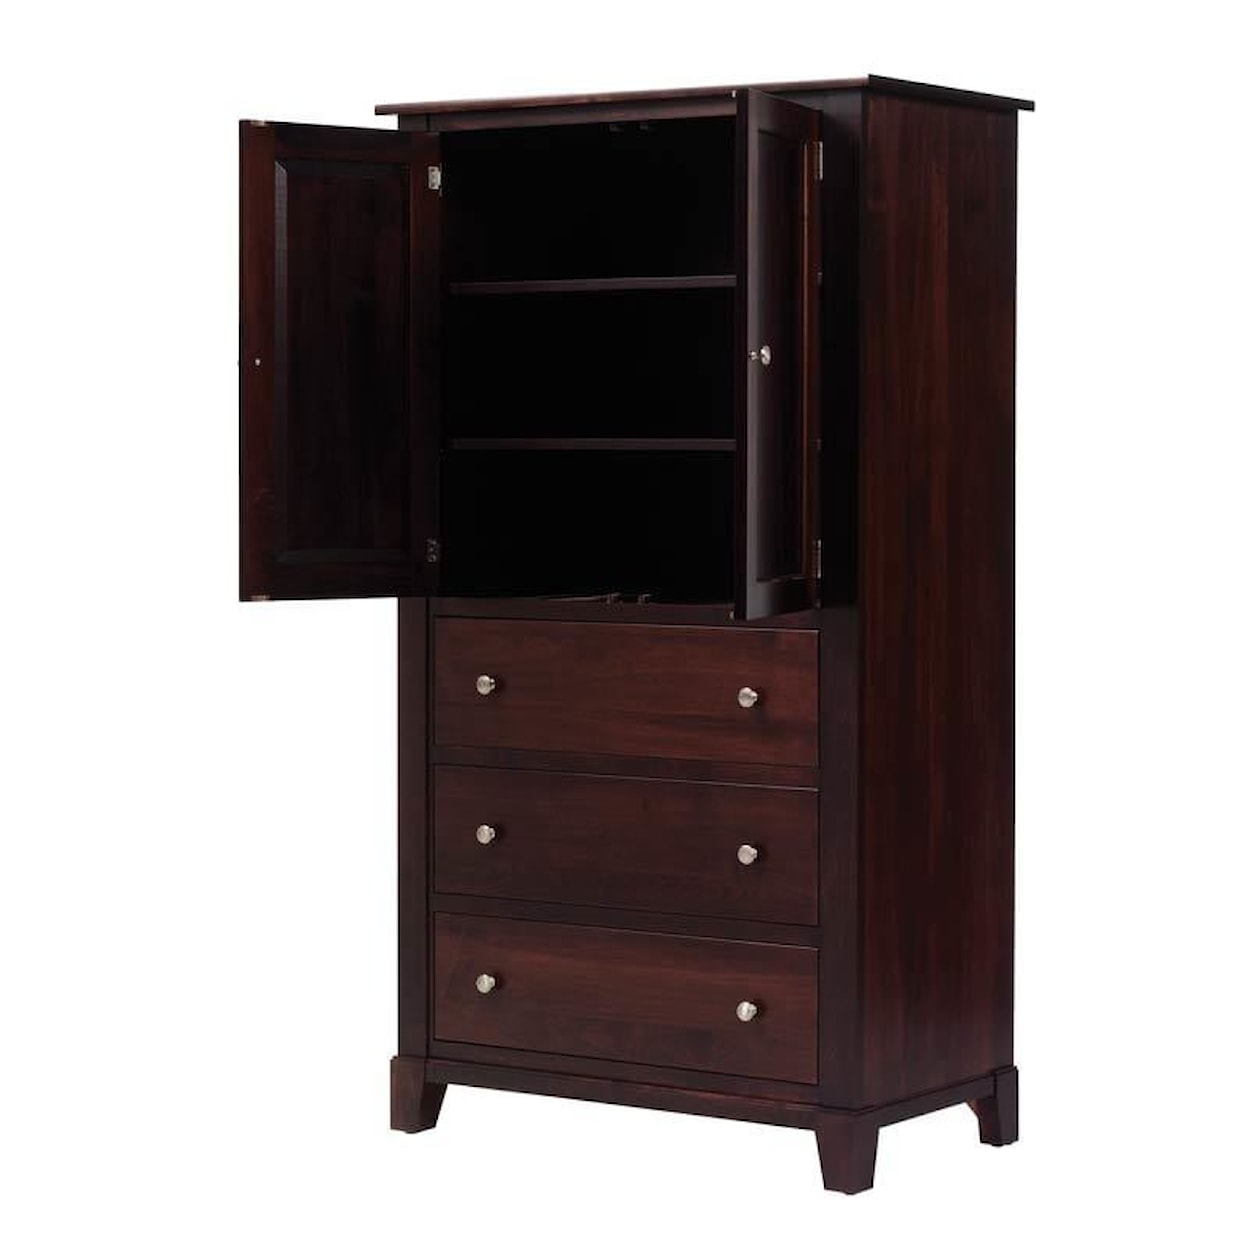 Millcraft Greenwich 3-Drawer Bedroom Armoire